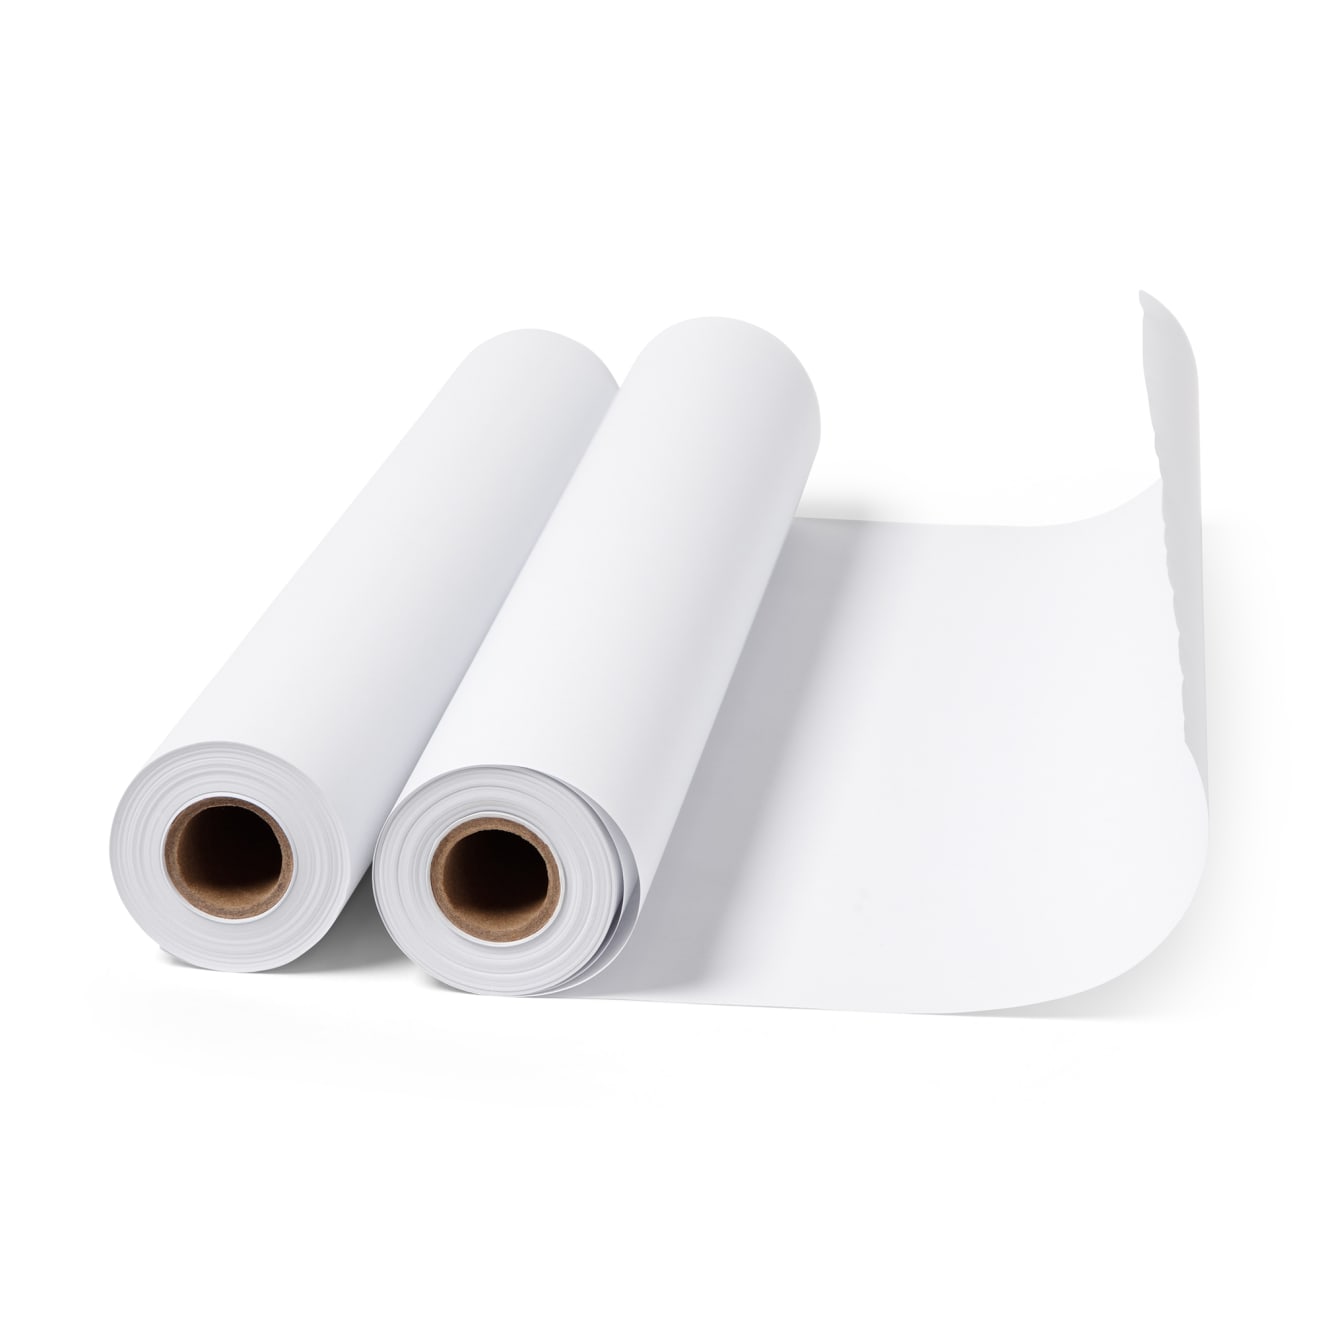 easel paper roll products for sale